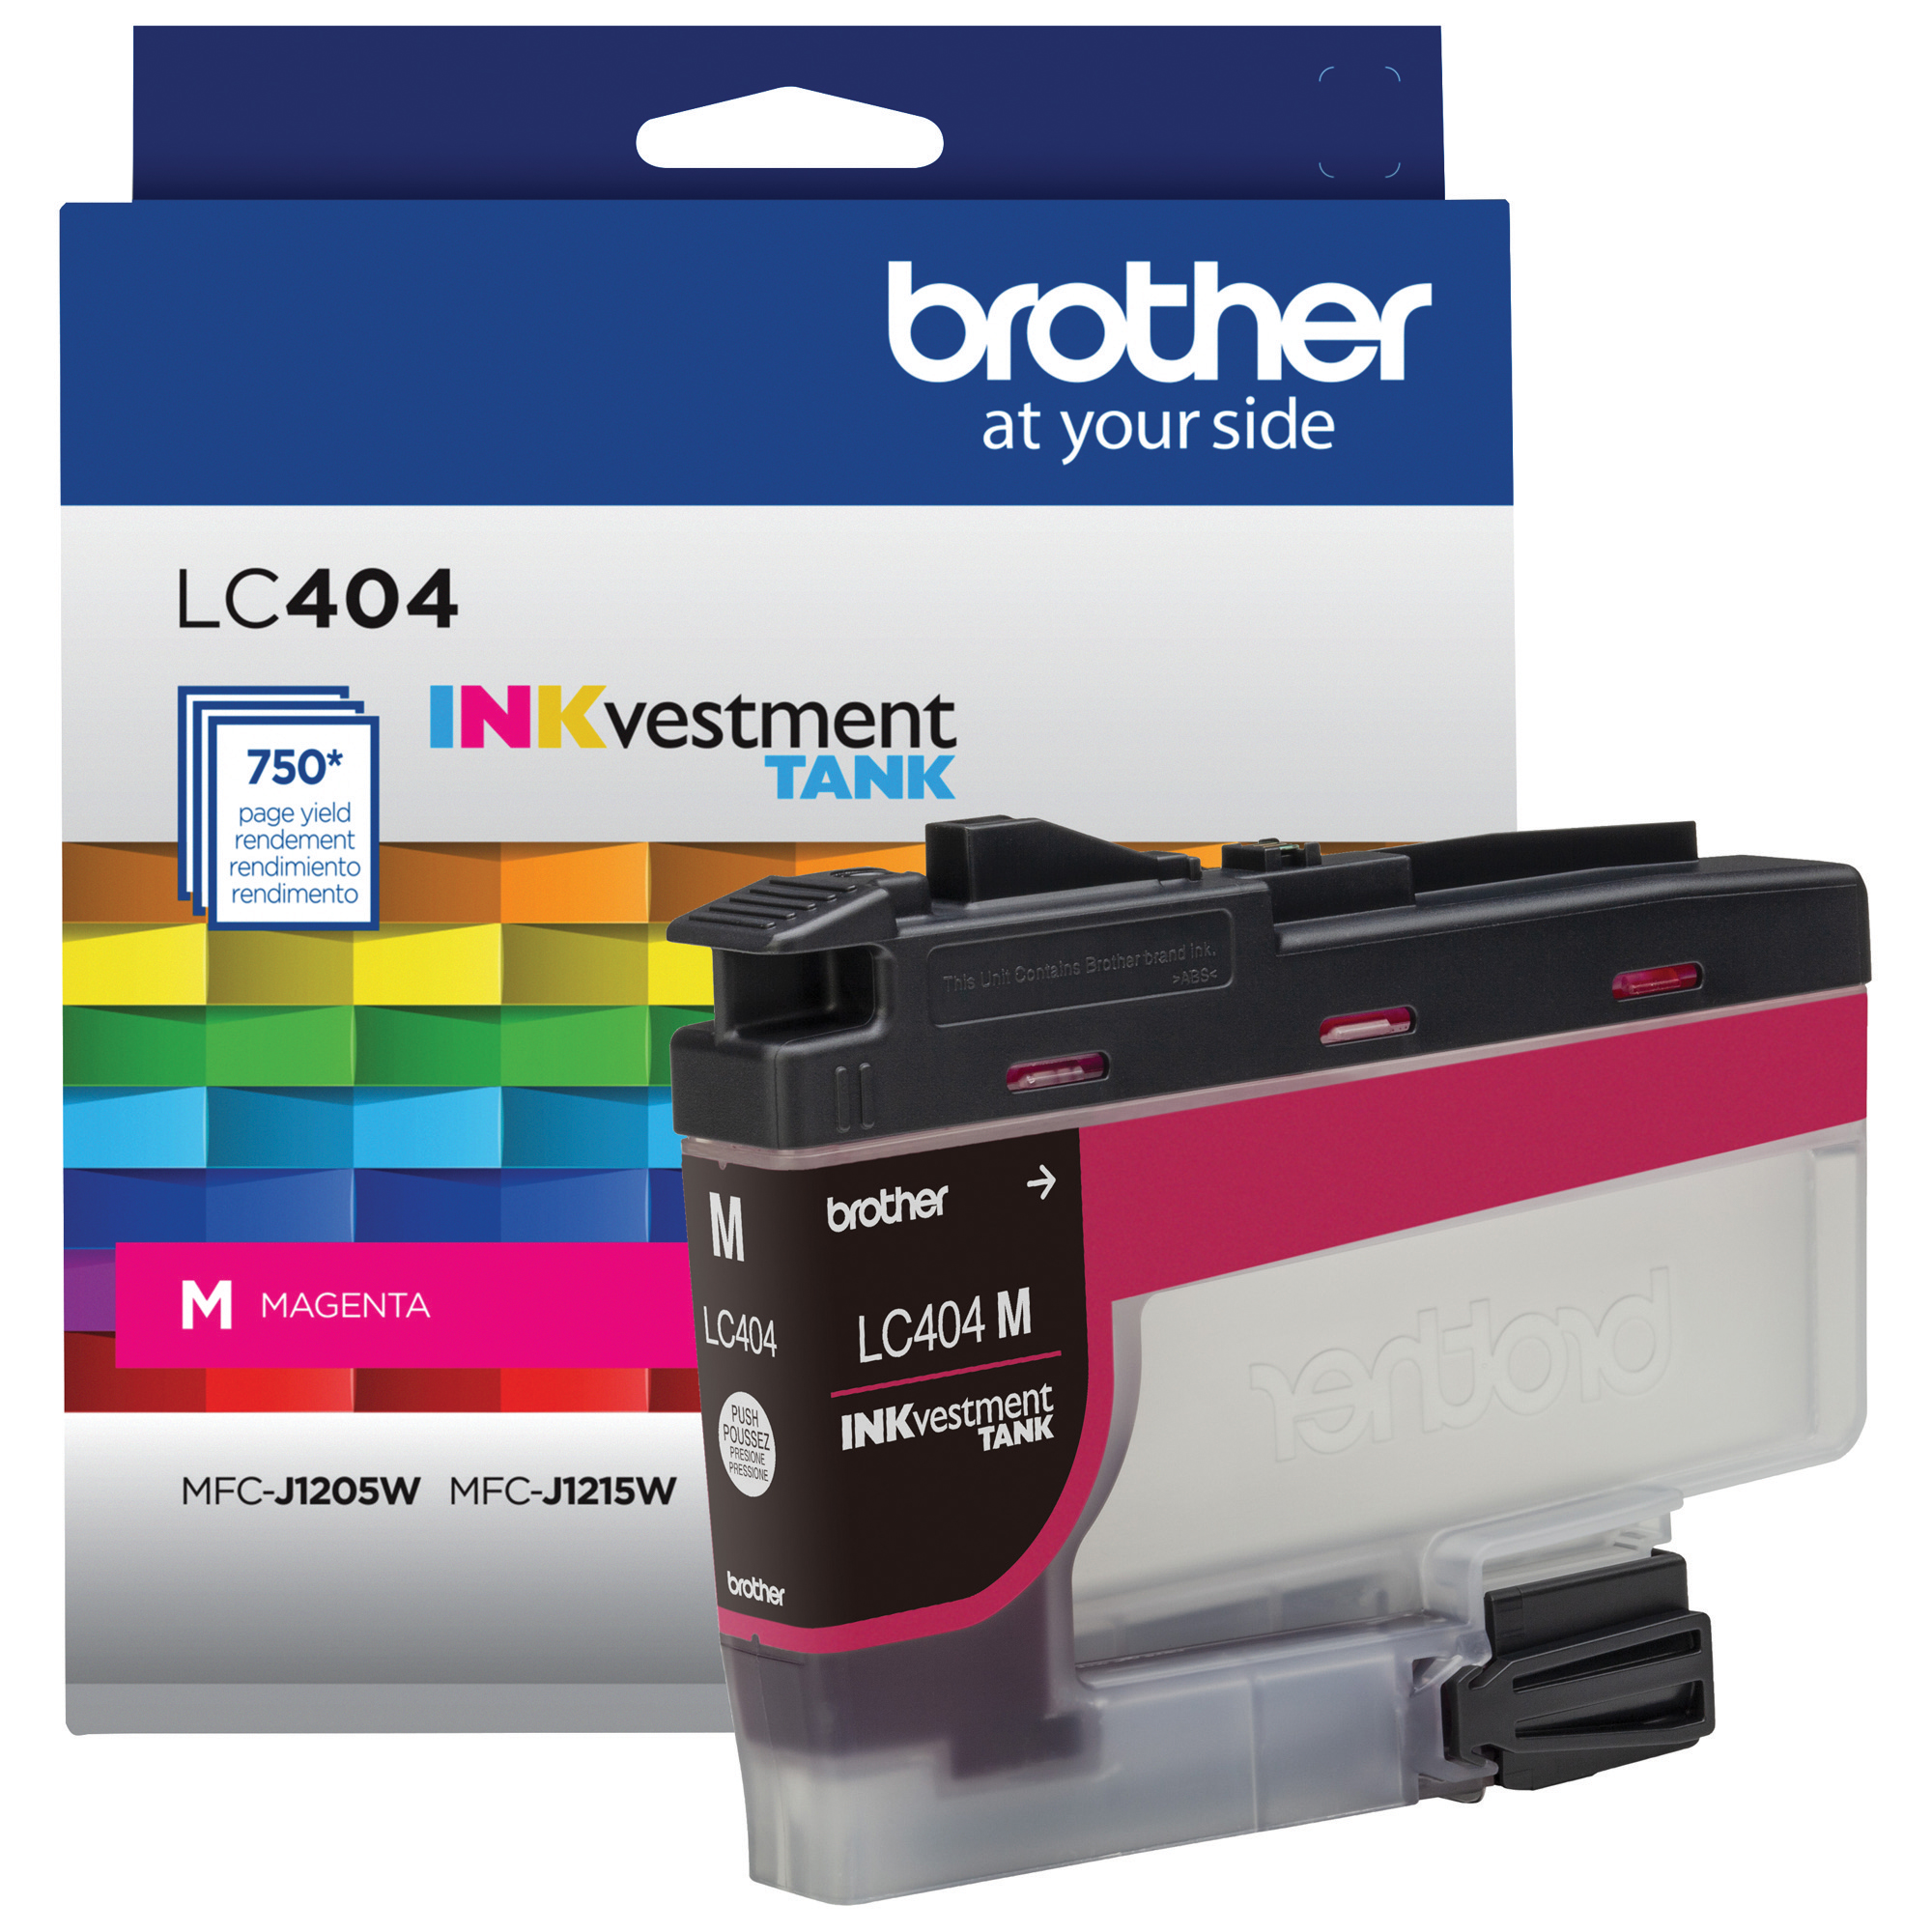 

Brother INKvestment Tank Standard-yield Ink, Magenta, Yields approx 750 pages